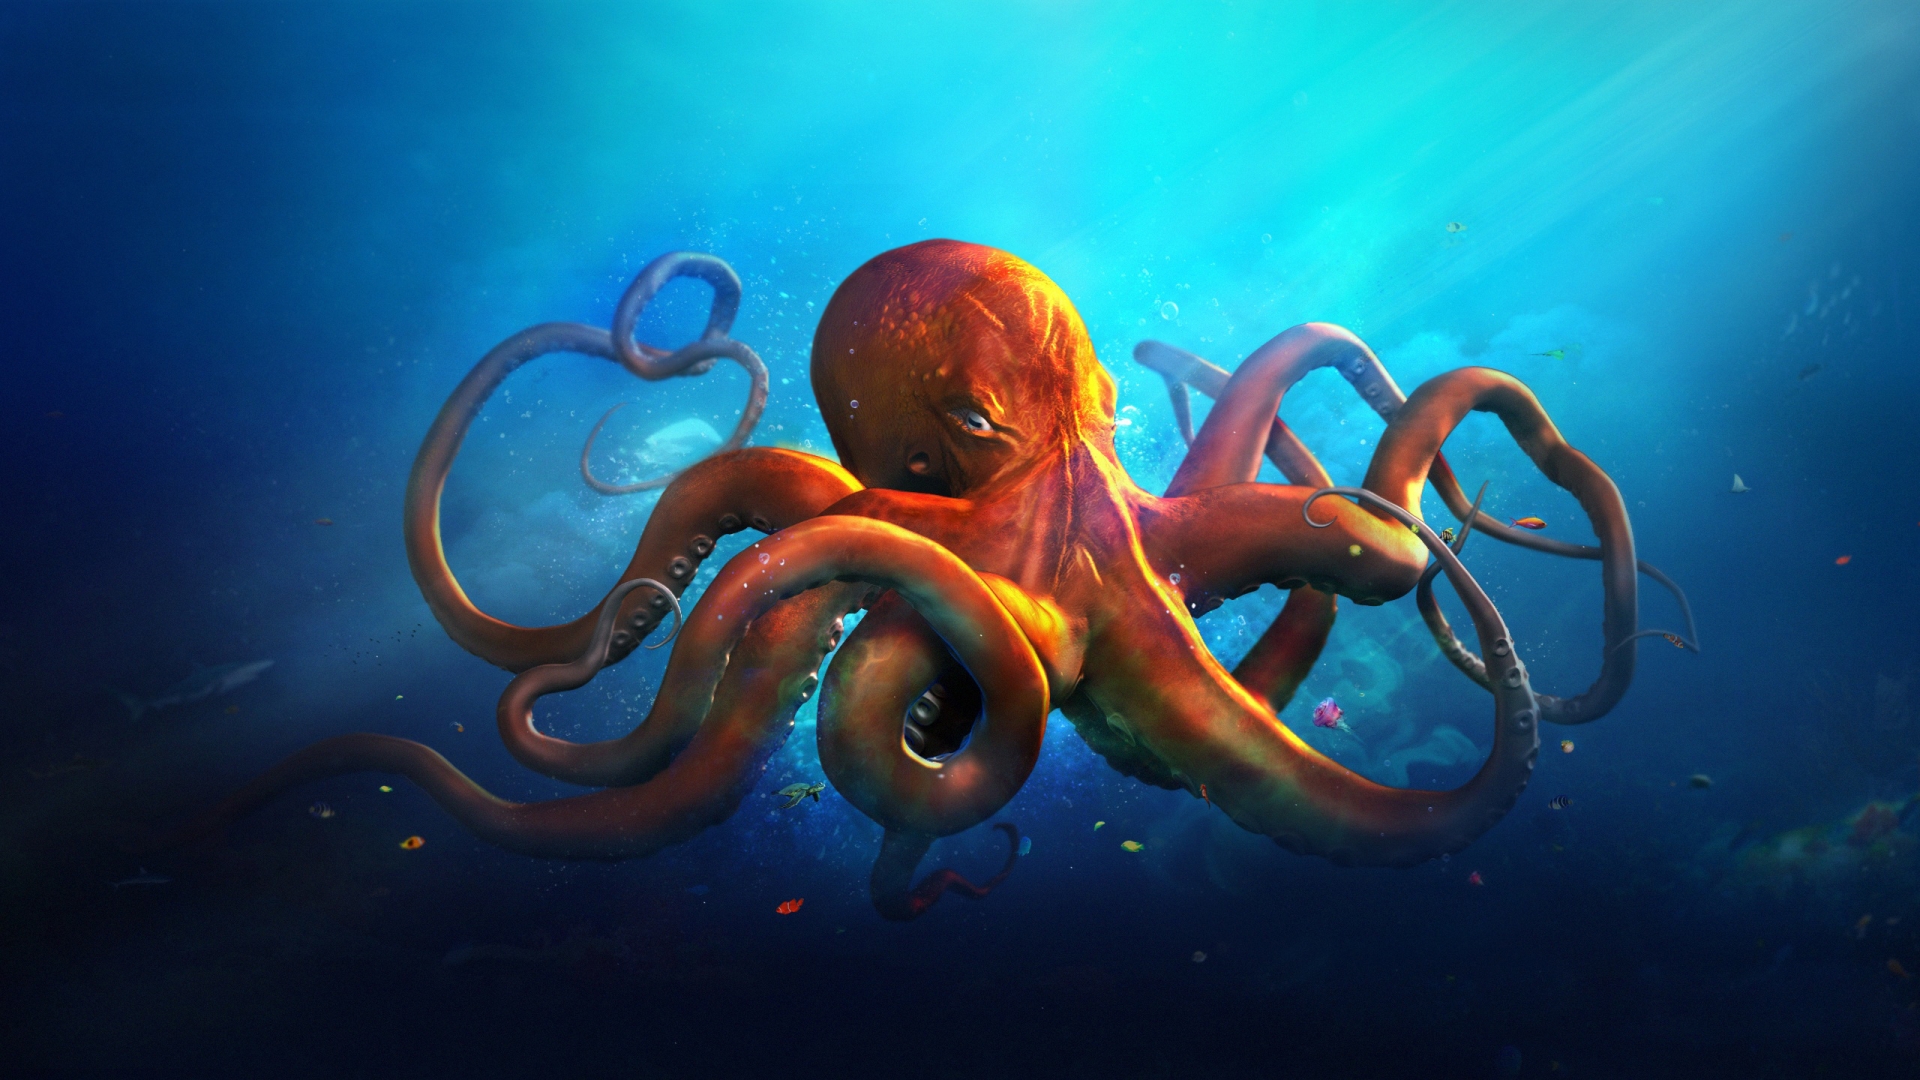 Just an Octopus for 1920 x 1080 HDTV 1080p resolution